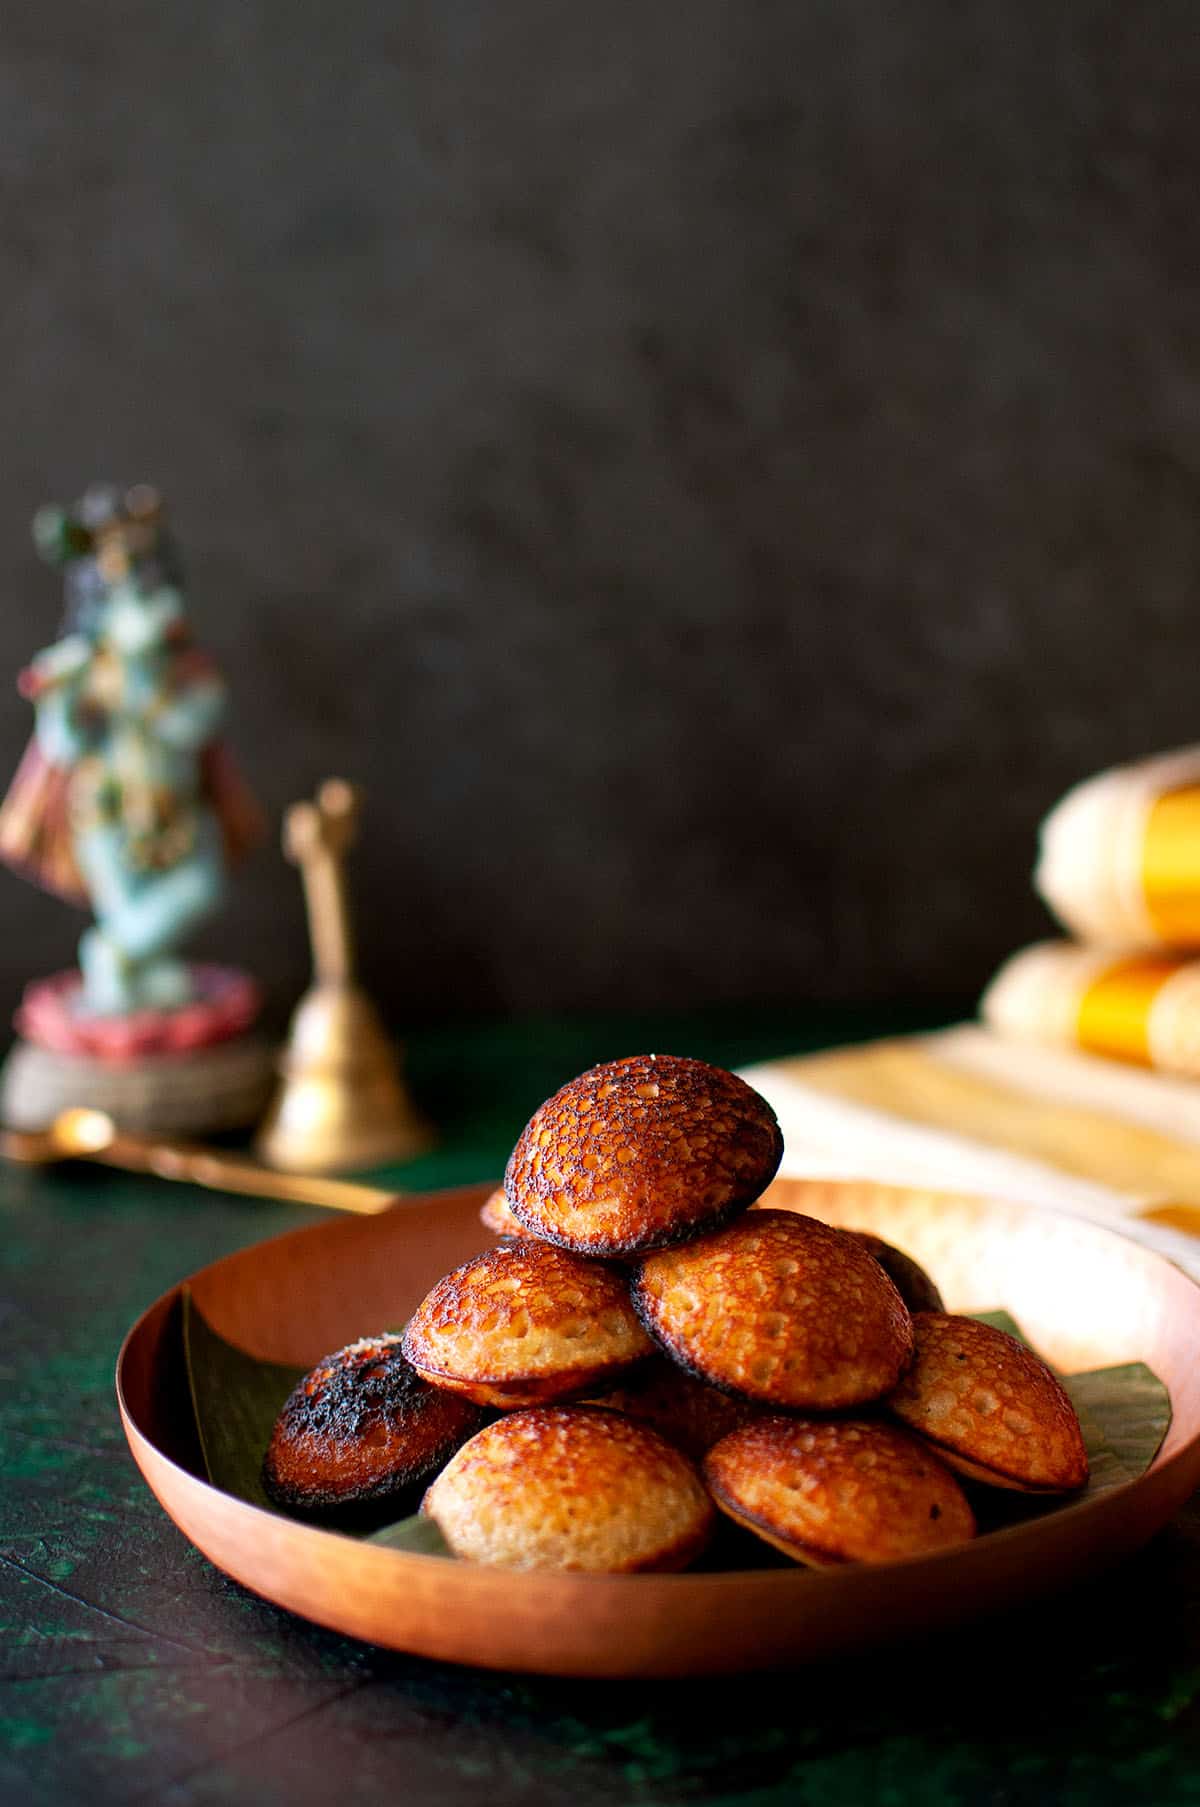 Plate with a stack of unniyappam.